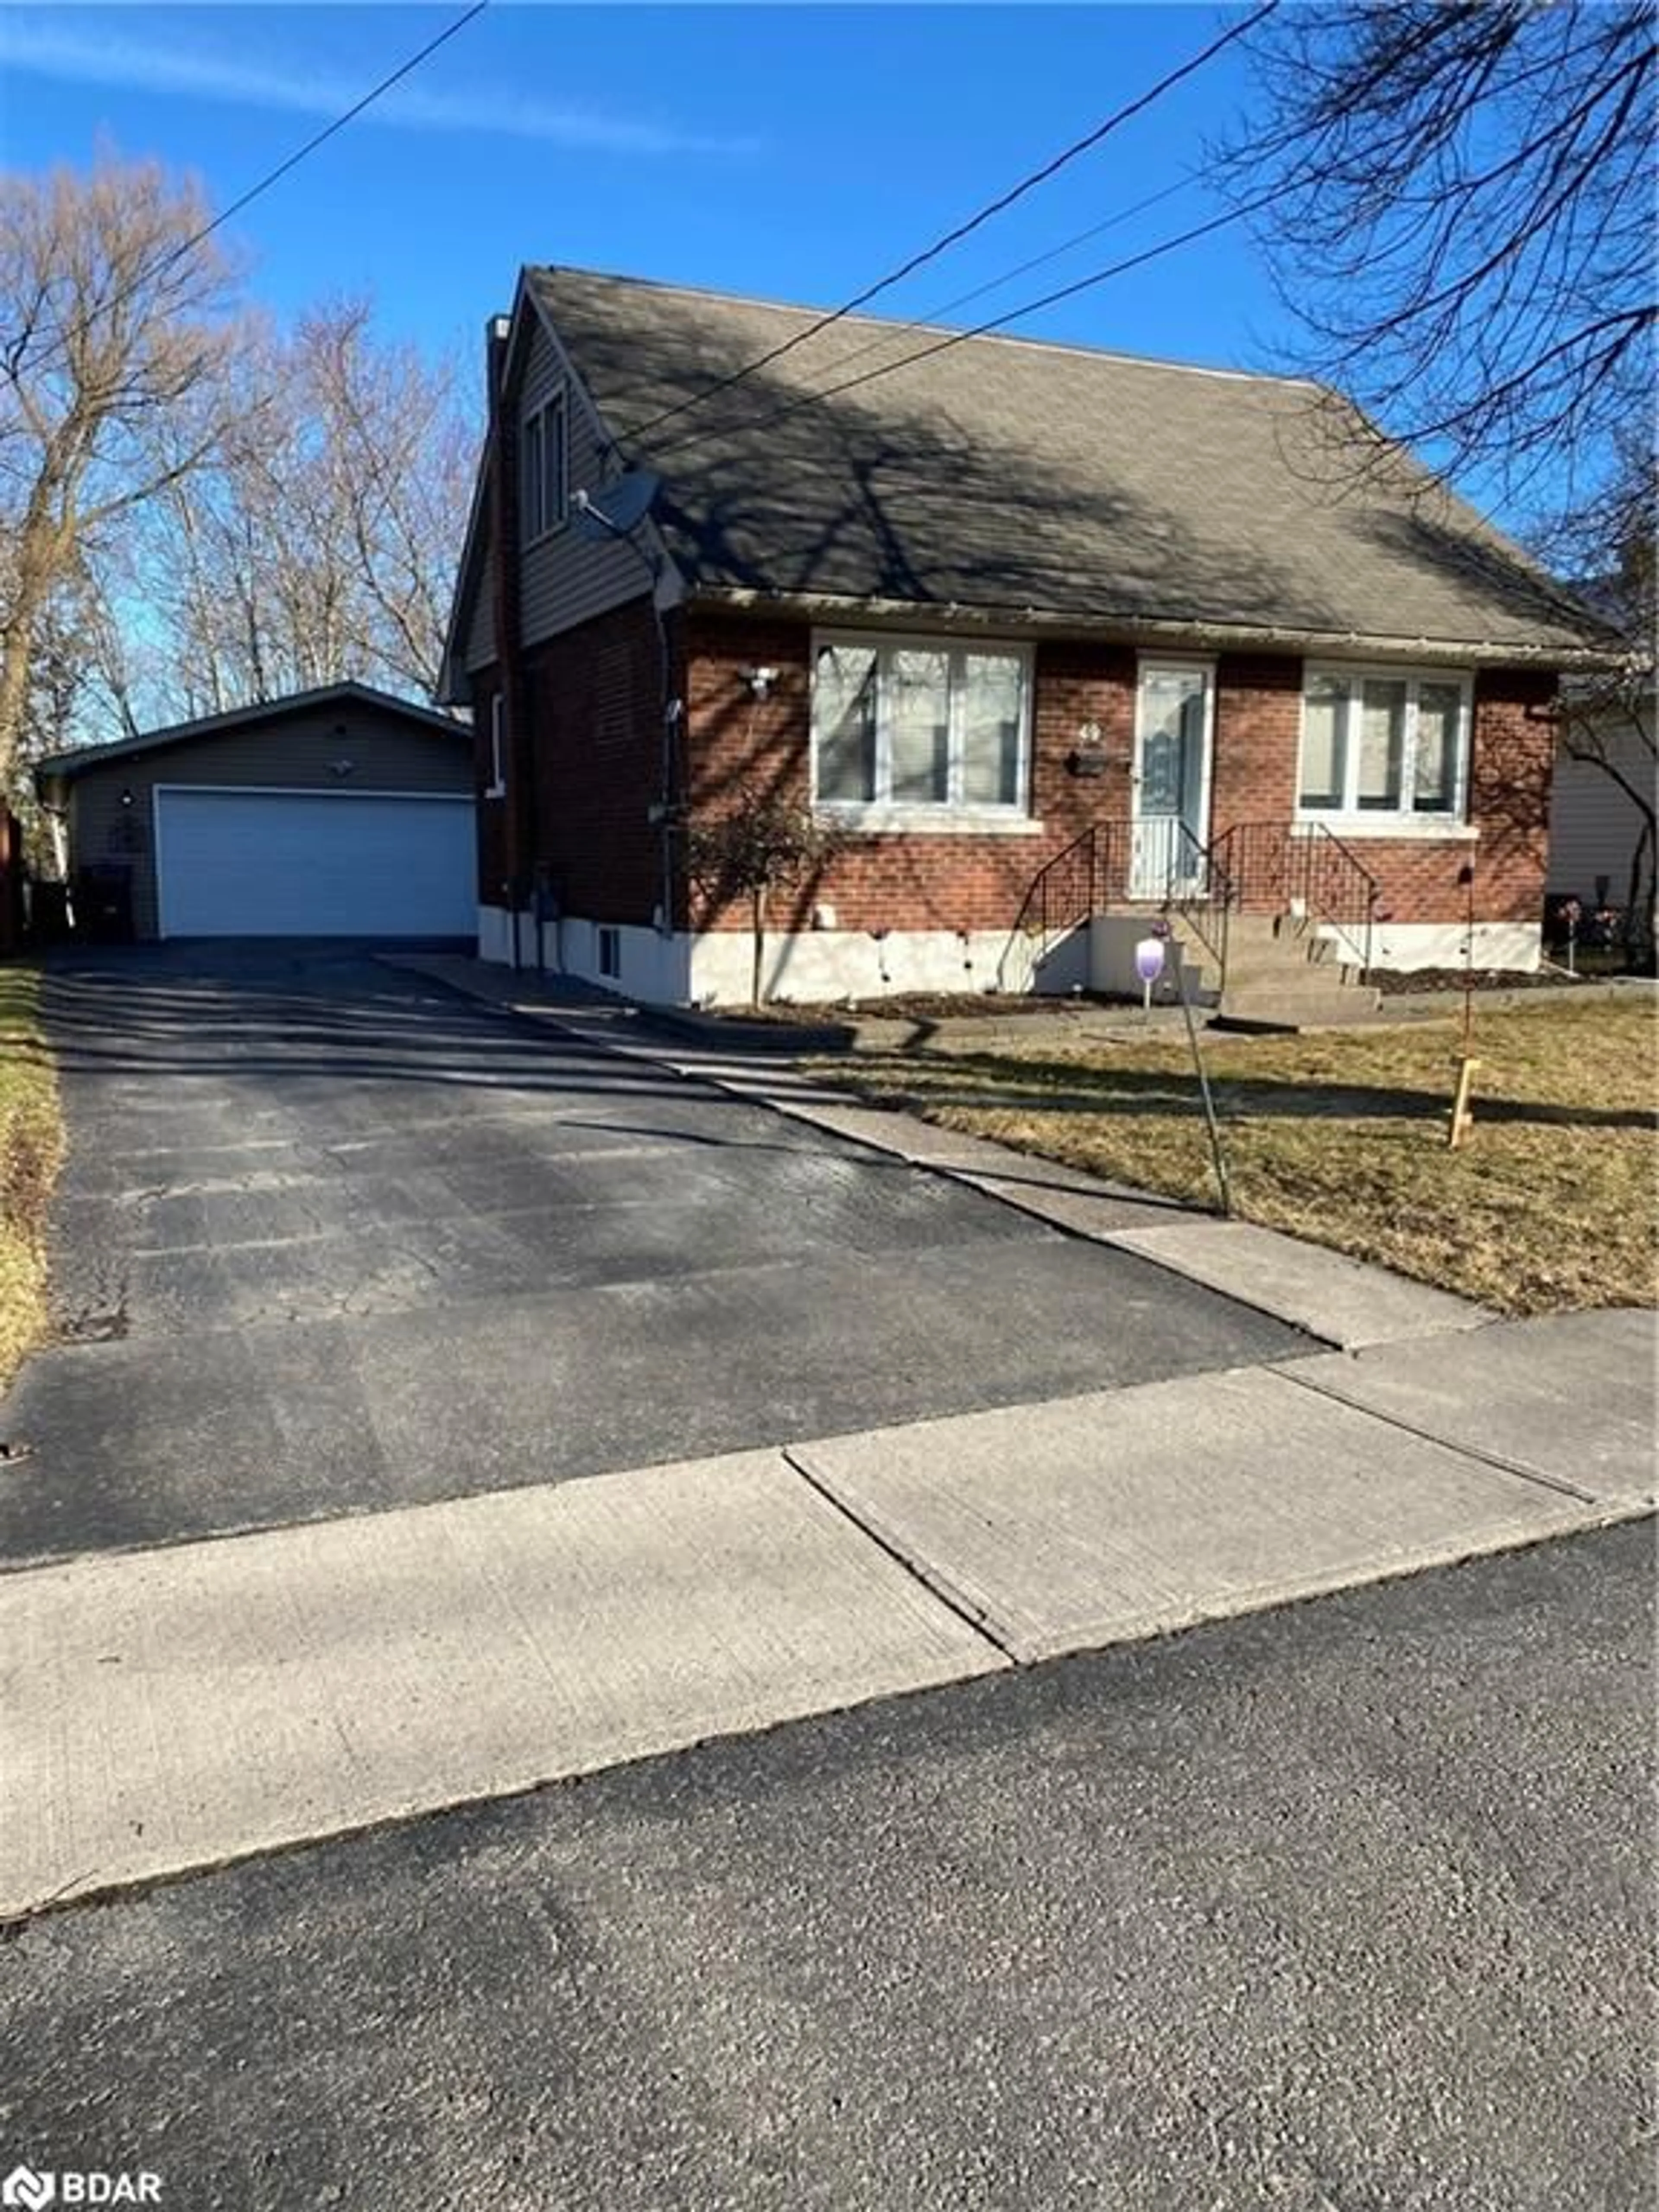 Home with brick exterior material for 49 Grandview Ave, Sault Ste. Marie Ontario P6B 3V7